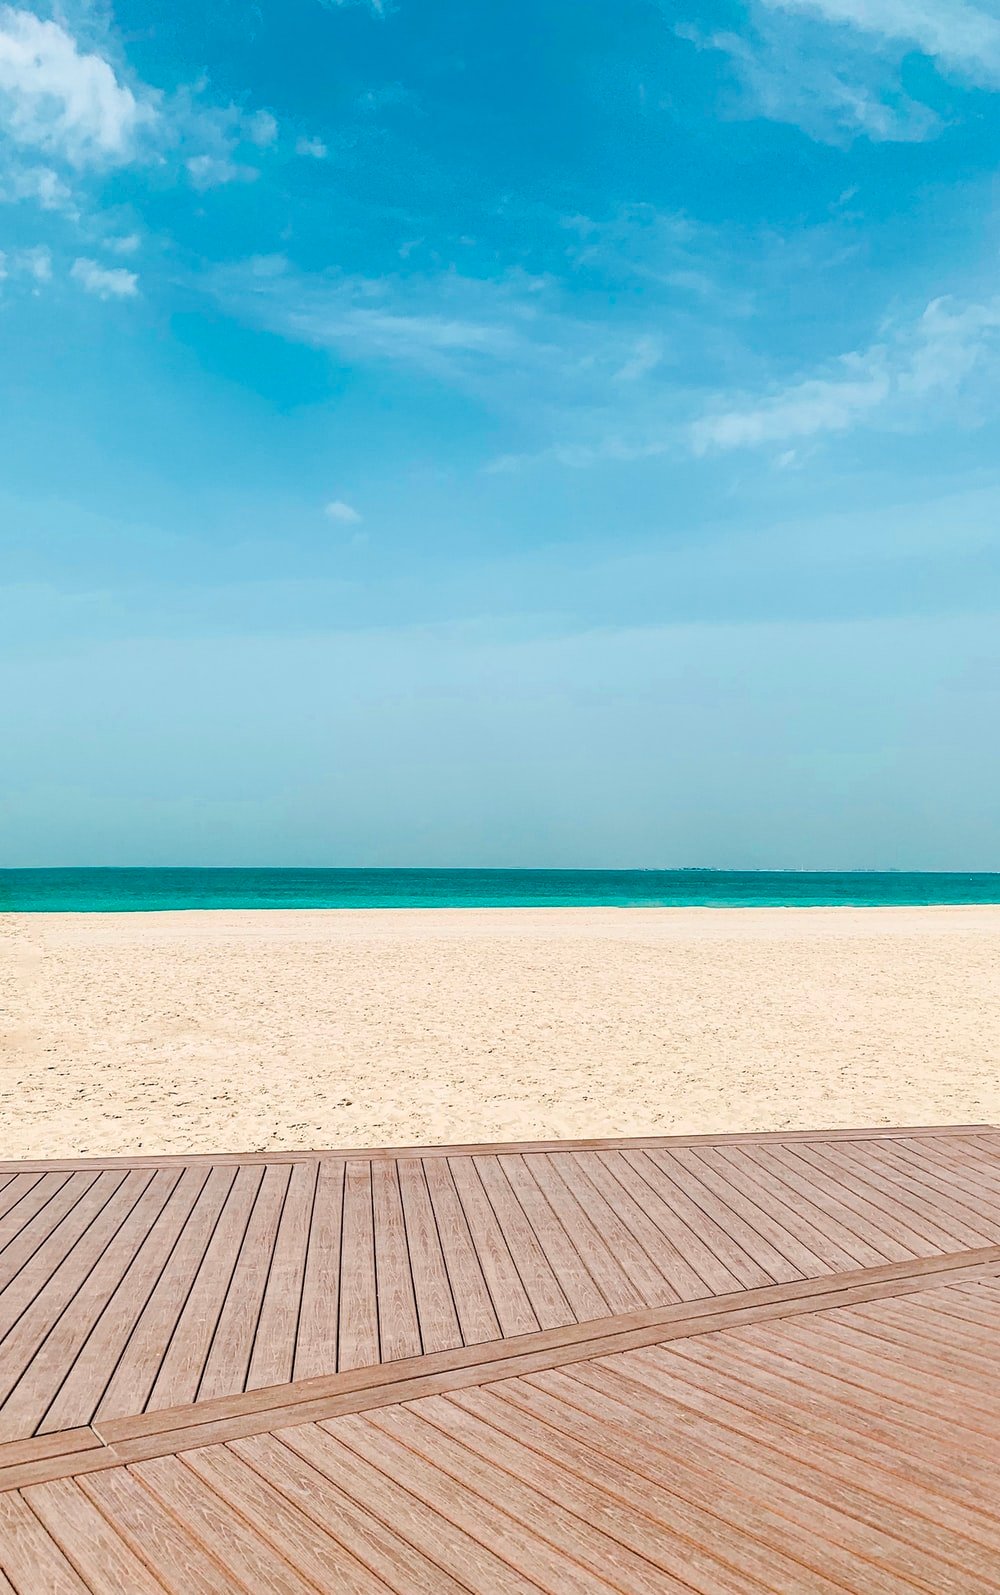 Jumeirah Beach Picture. Download Free Image